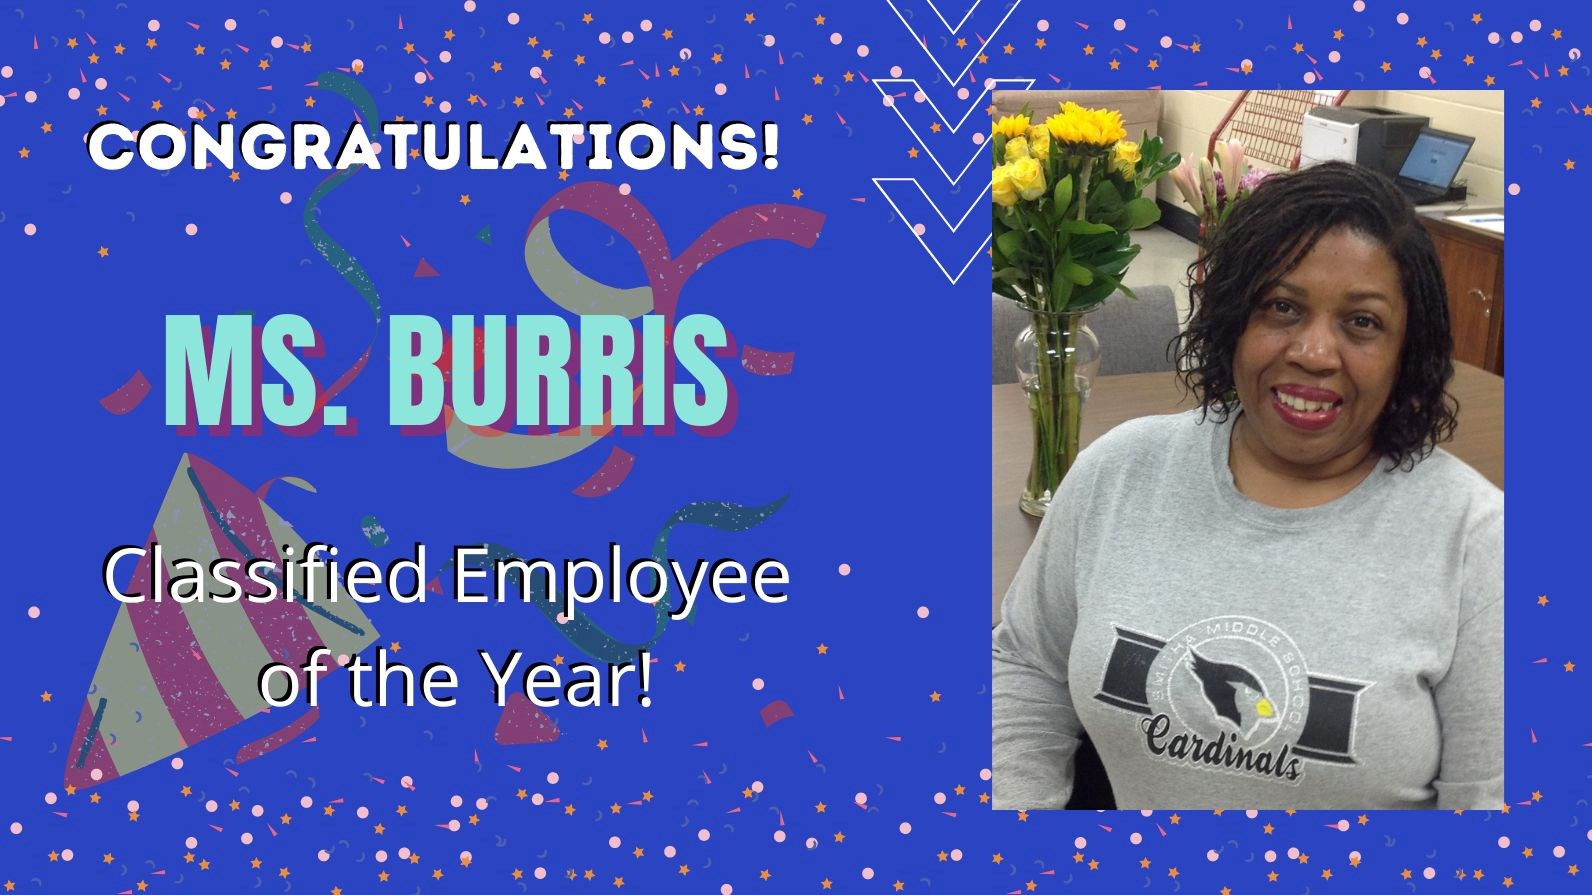 blue background with sparkles and party horns. Picture of Ms. Burris in school tshirt. Text reads: Congratulations, Ms. Burris! Classified Employee of the Year!